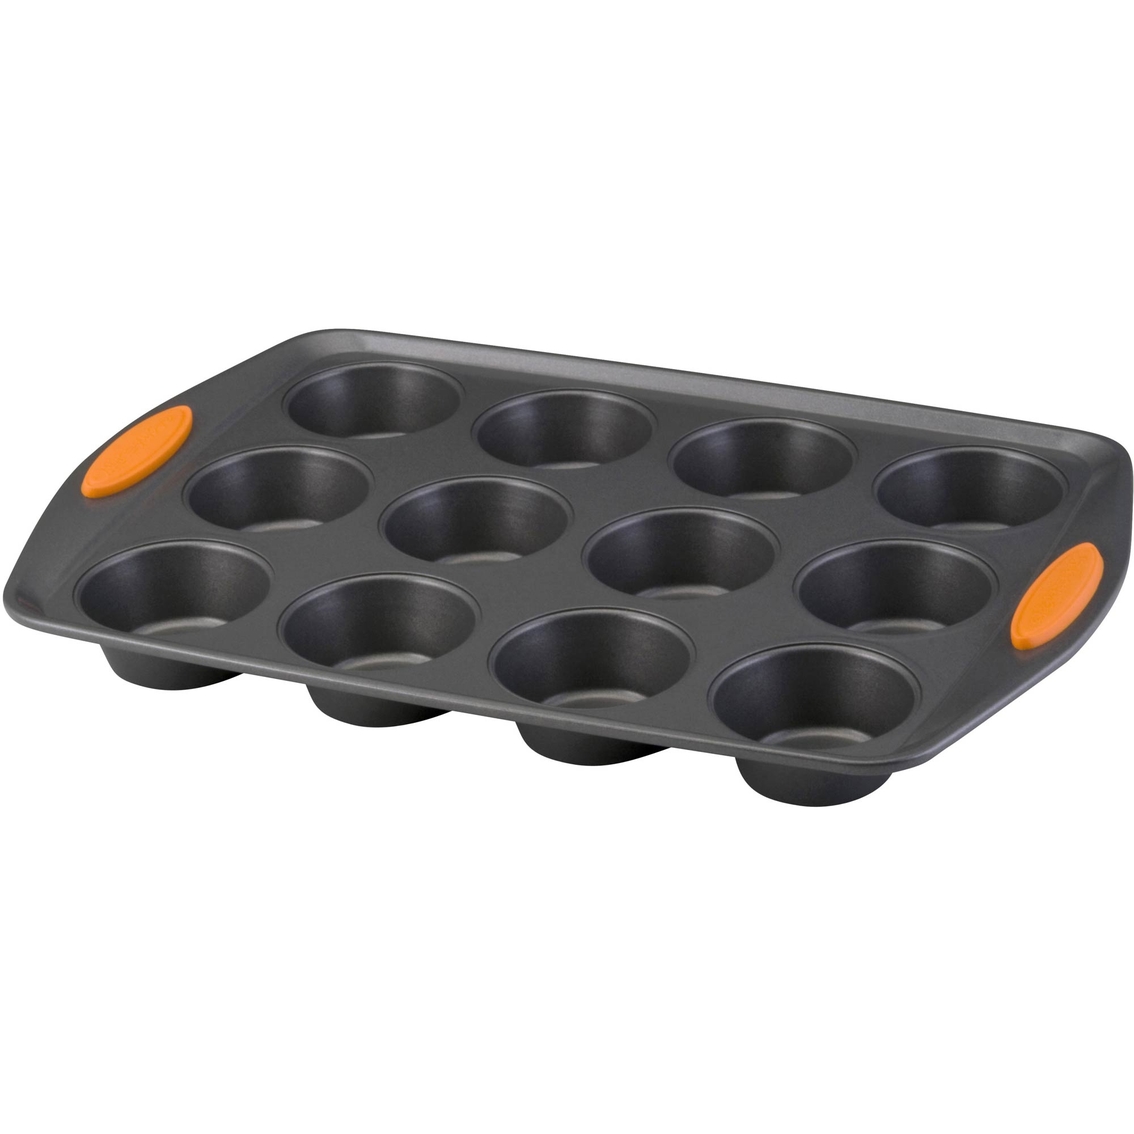 Rachael Ray Yum-o! Nonstick Bakeware 12 Cup Oven Lovin Muffin and Cupcake Pan - Image 3 of 4